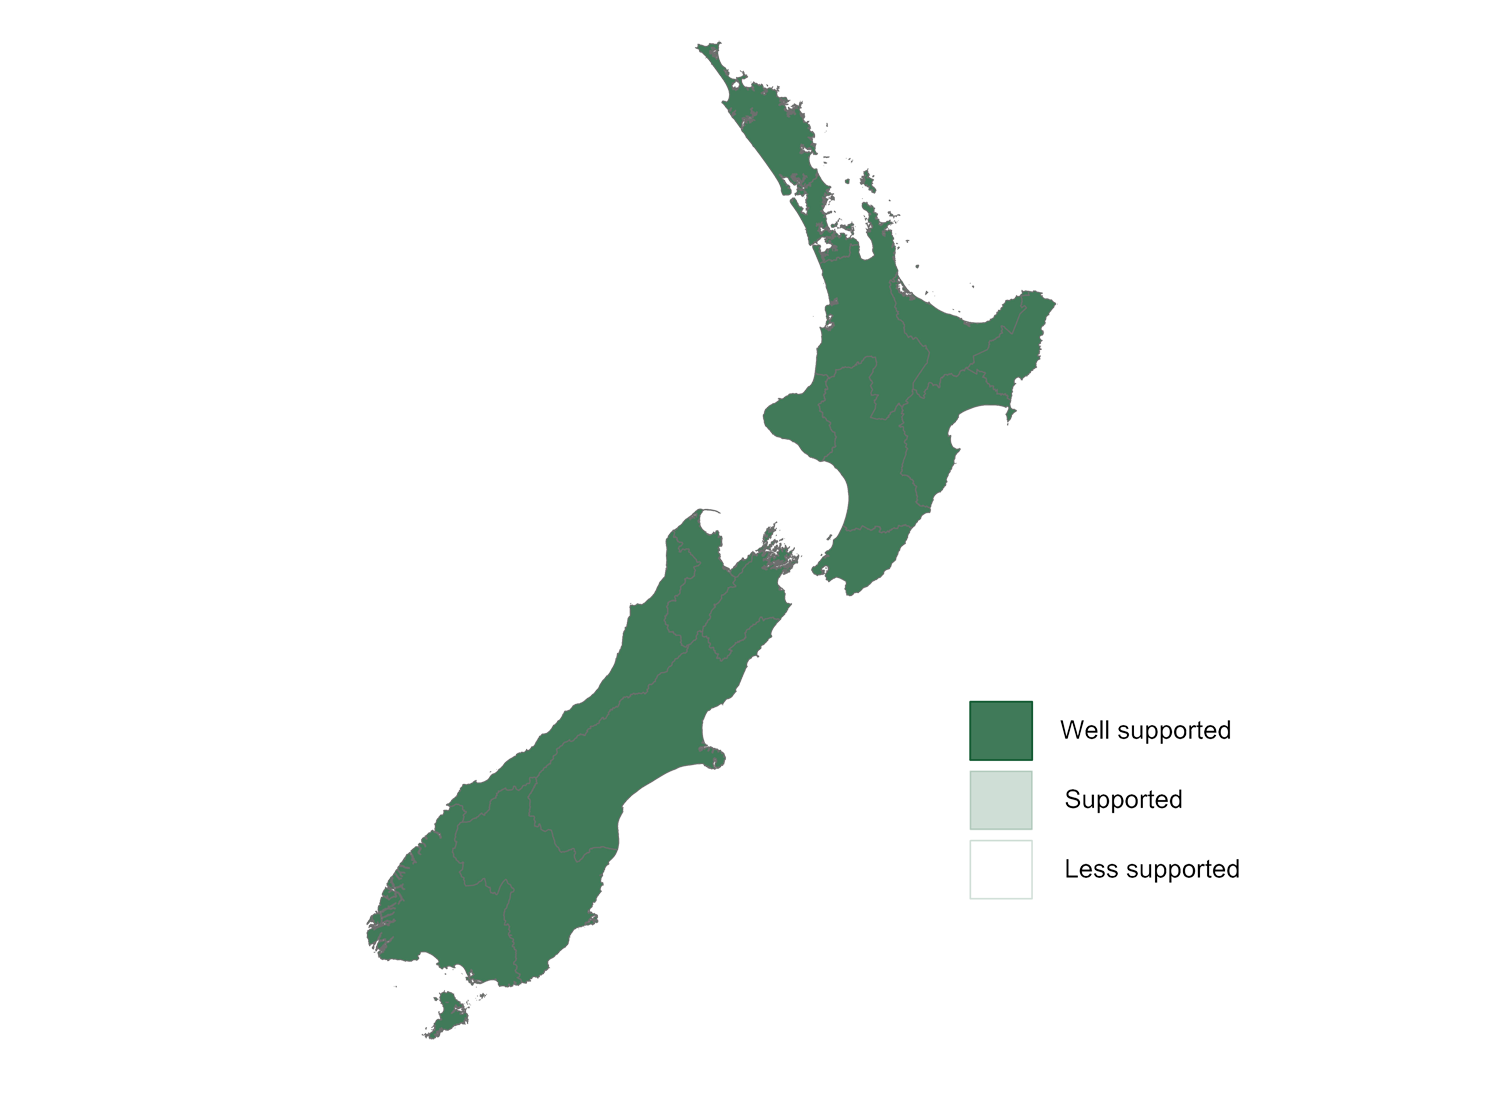 New Zealand map showing that sheep and beef farming is supported in all regions.